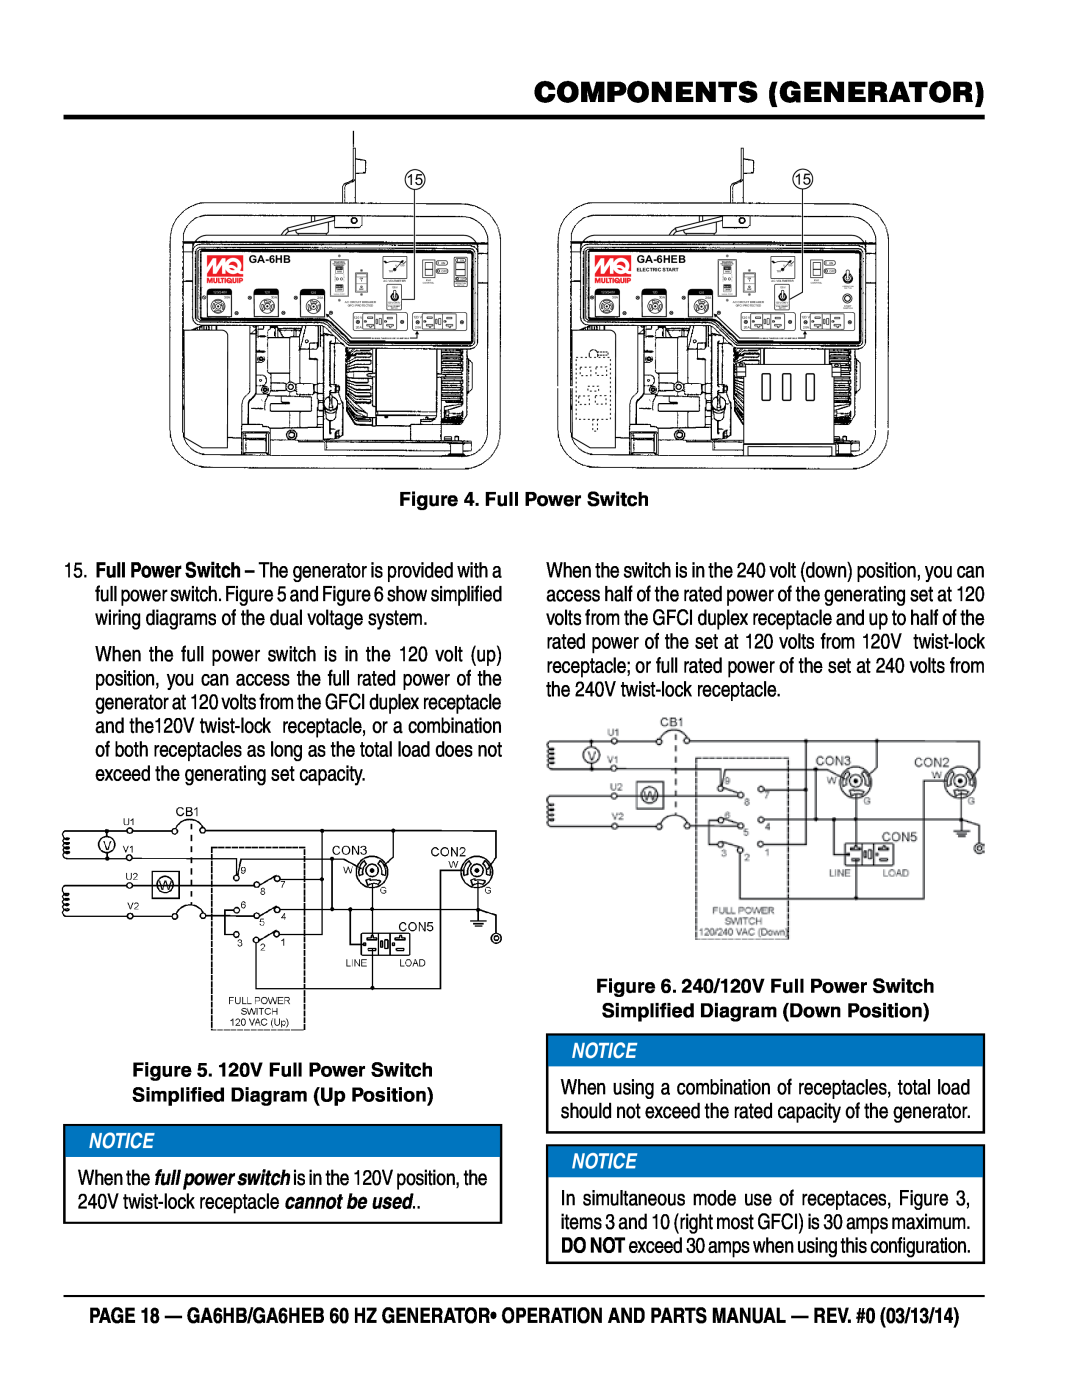 Multiquip ga6HEB, ga6HB components generator, 240/120V Full Power Switch Simplified Diagram Down Position, Control 